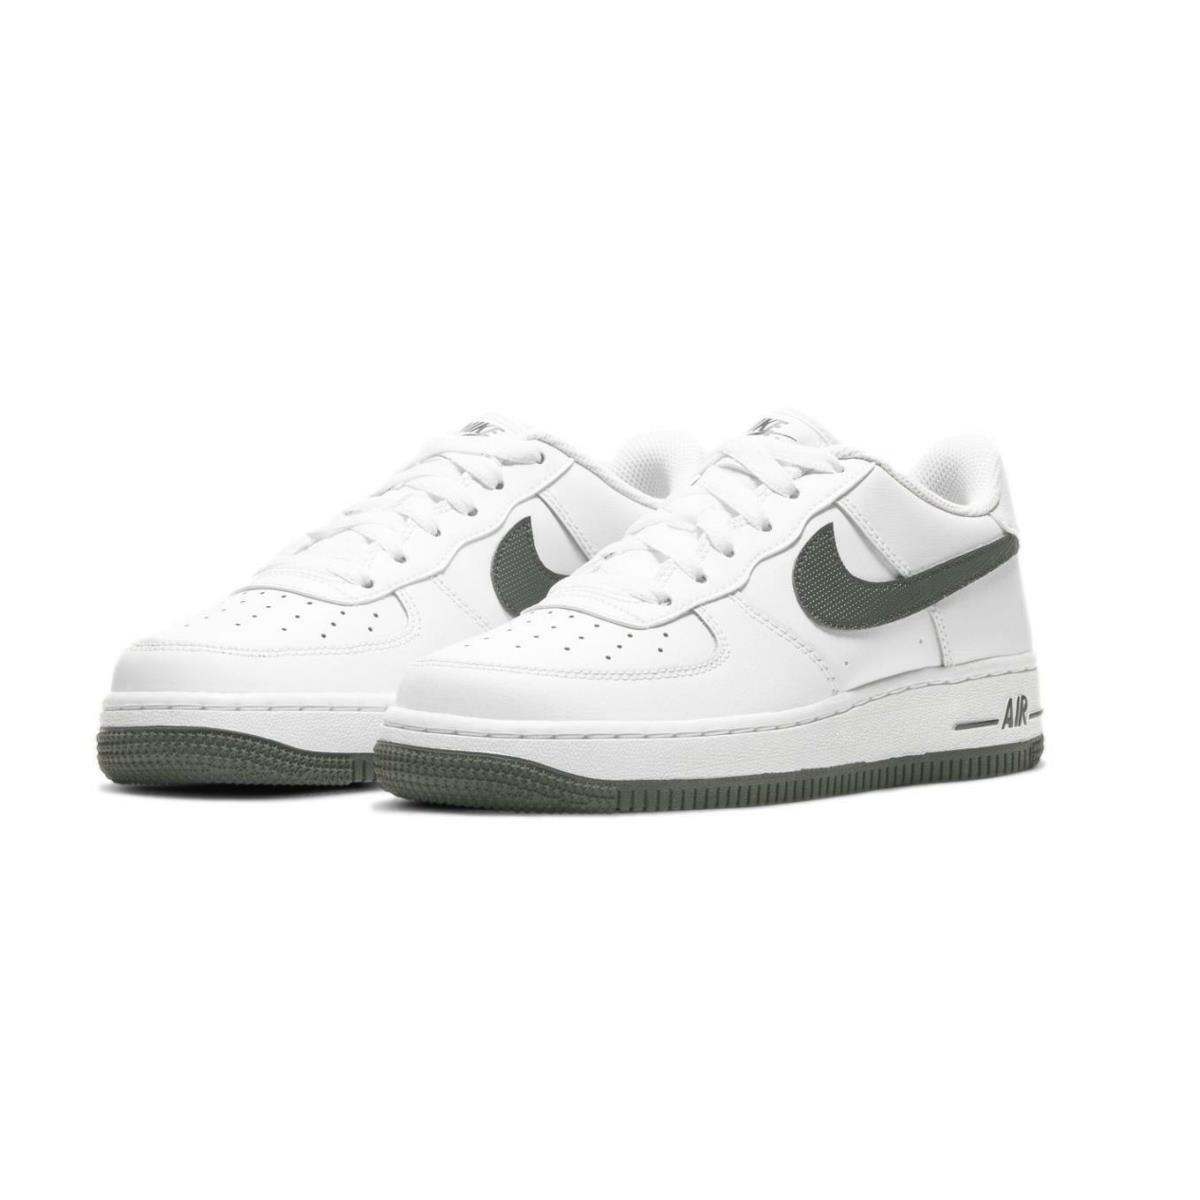 Nike Air Force 1 Crater Flyknit Shoes Photon Dust White DC4831-101 